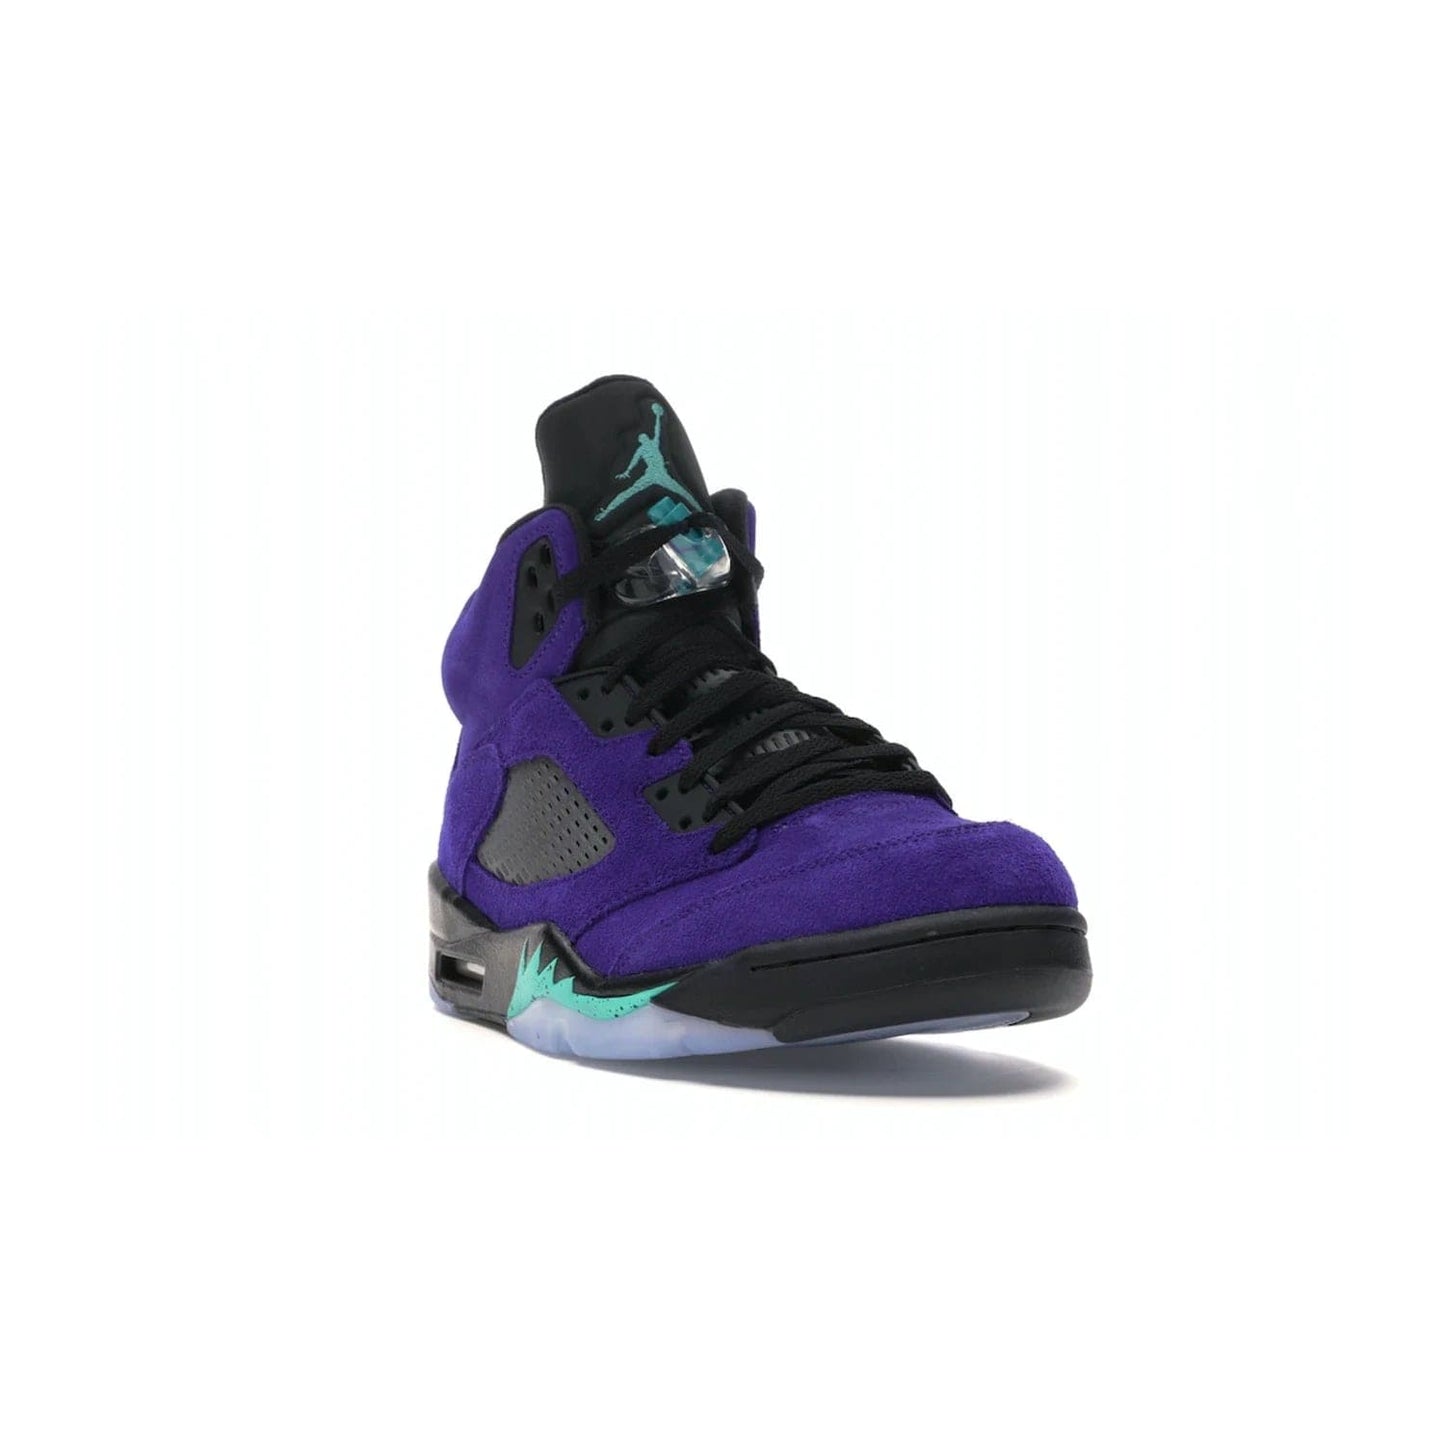 Jordan 5 Retro Alternate Grape - Image 7 - Only at www.BallersClubKickz.com - Bring the classic Jordan 5 Retro Alternate Grape to your sneaker collection! Featuring a purple suede upper, charcoal underlays, green detailing, and an icy and green outsole. Releasing for the first time since 1990, don't miss this chance to add a piece of sneaker history to your collection.